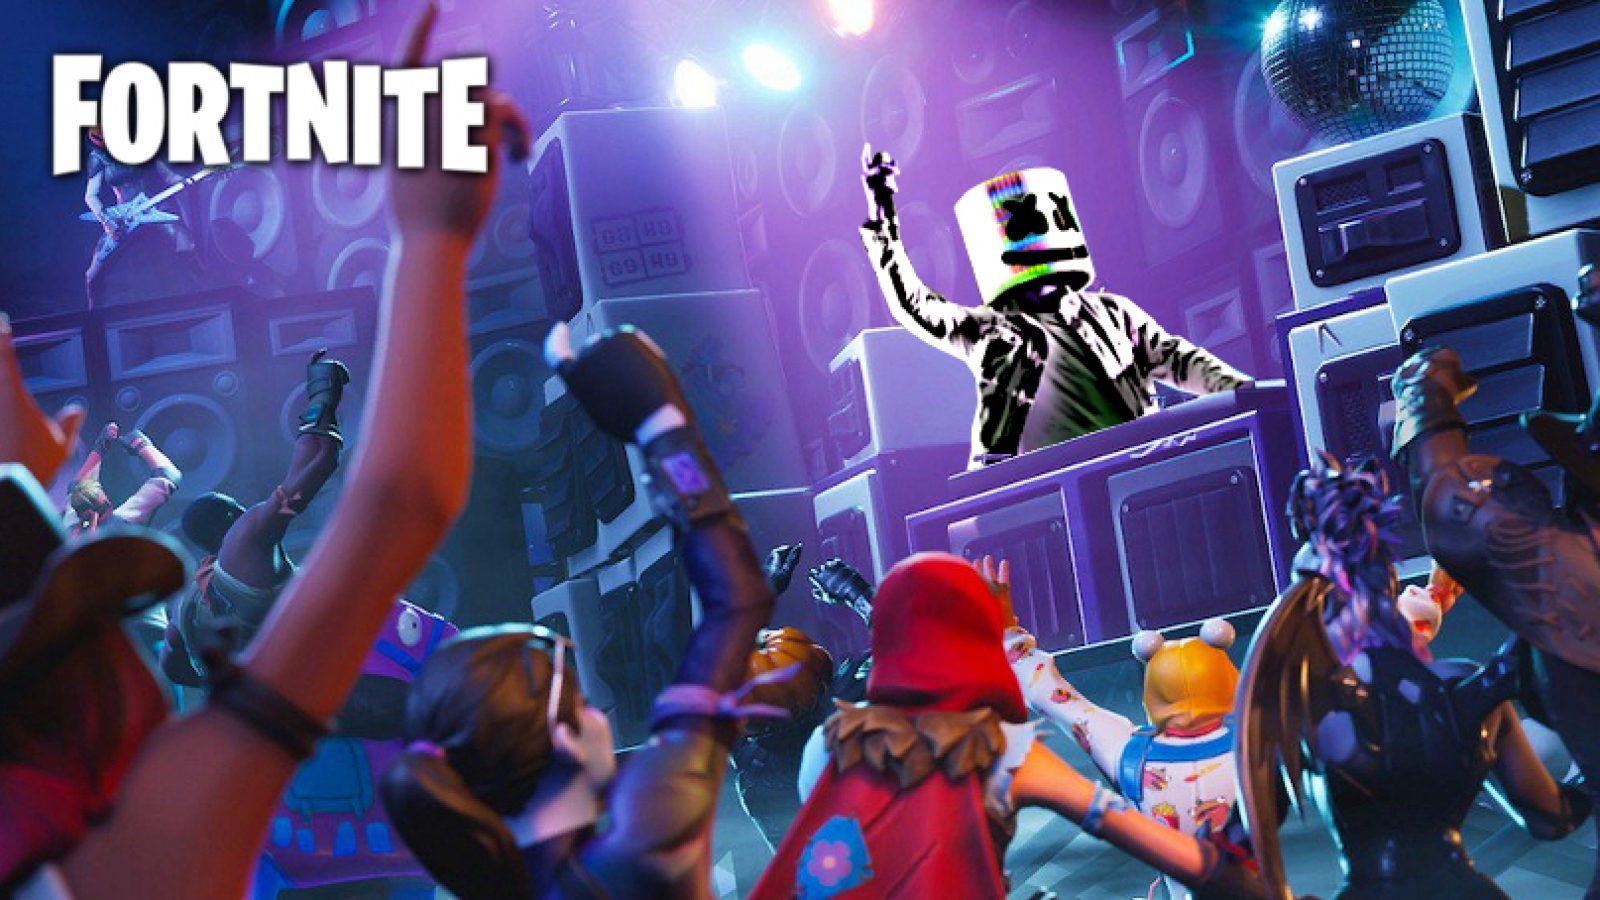 How to watch Fortnite Marshmello concert event Schedule, ingame